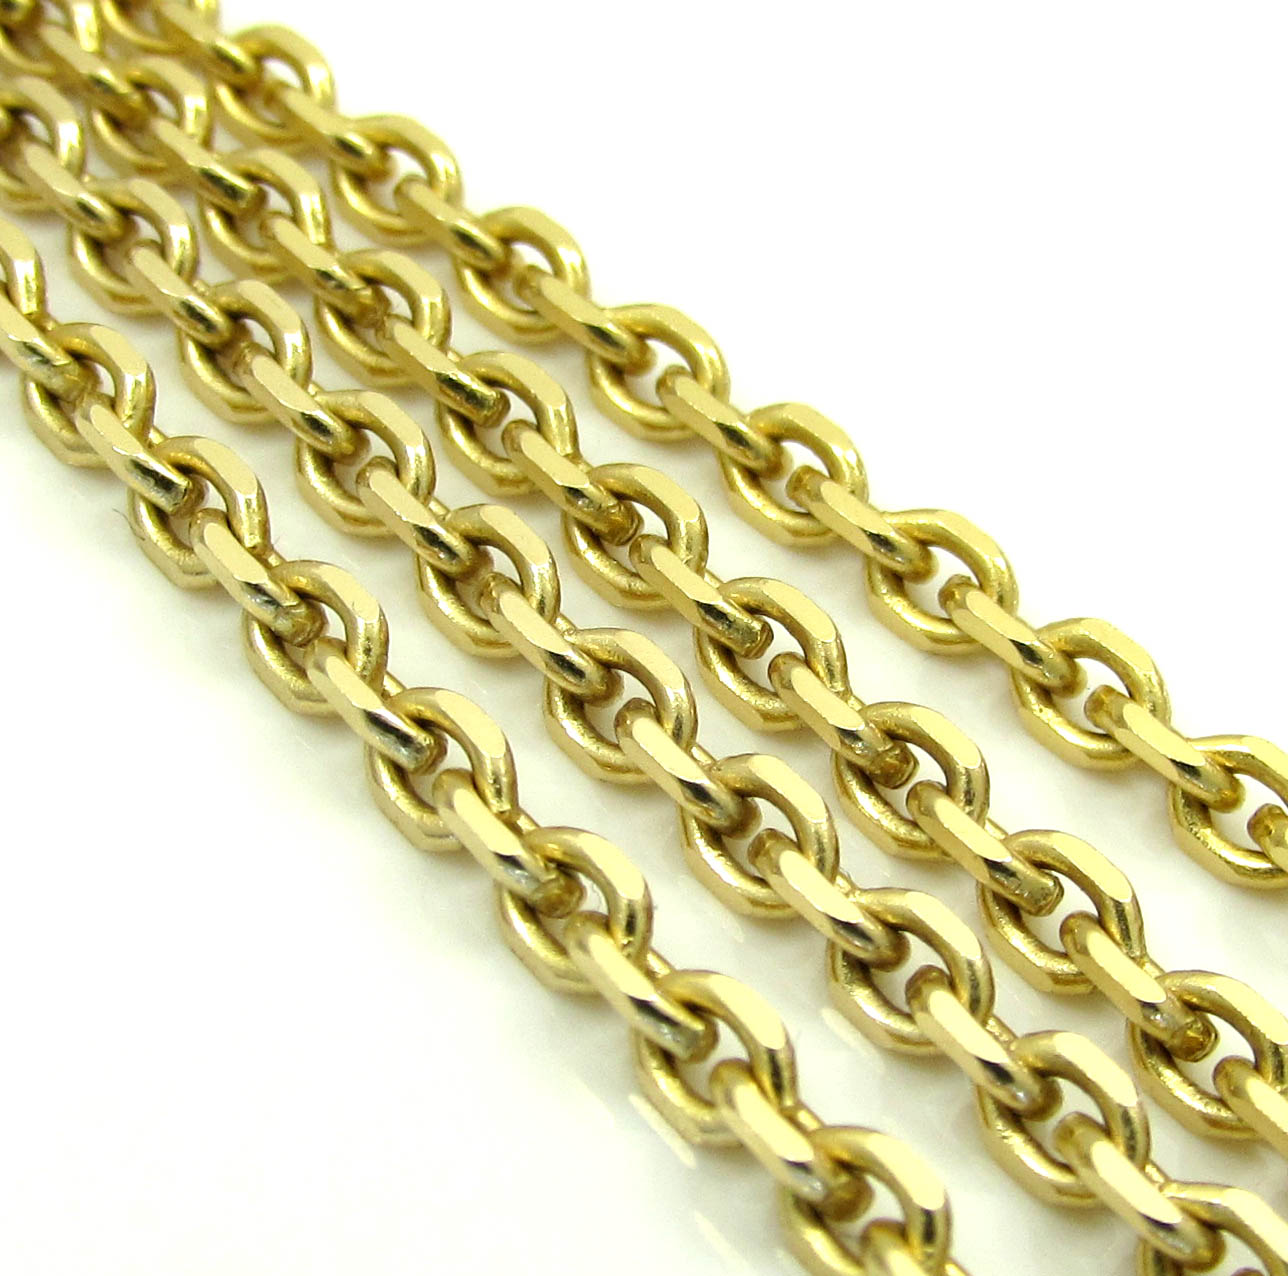  JewelsForum 22k Yellow Gold Chain Braided Design Cable